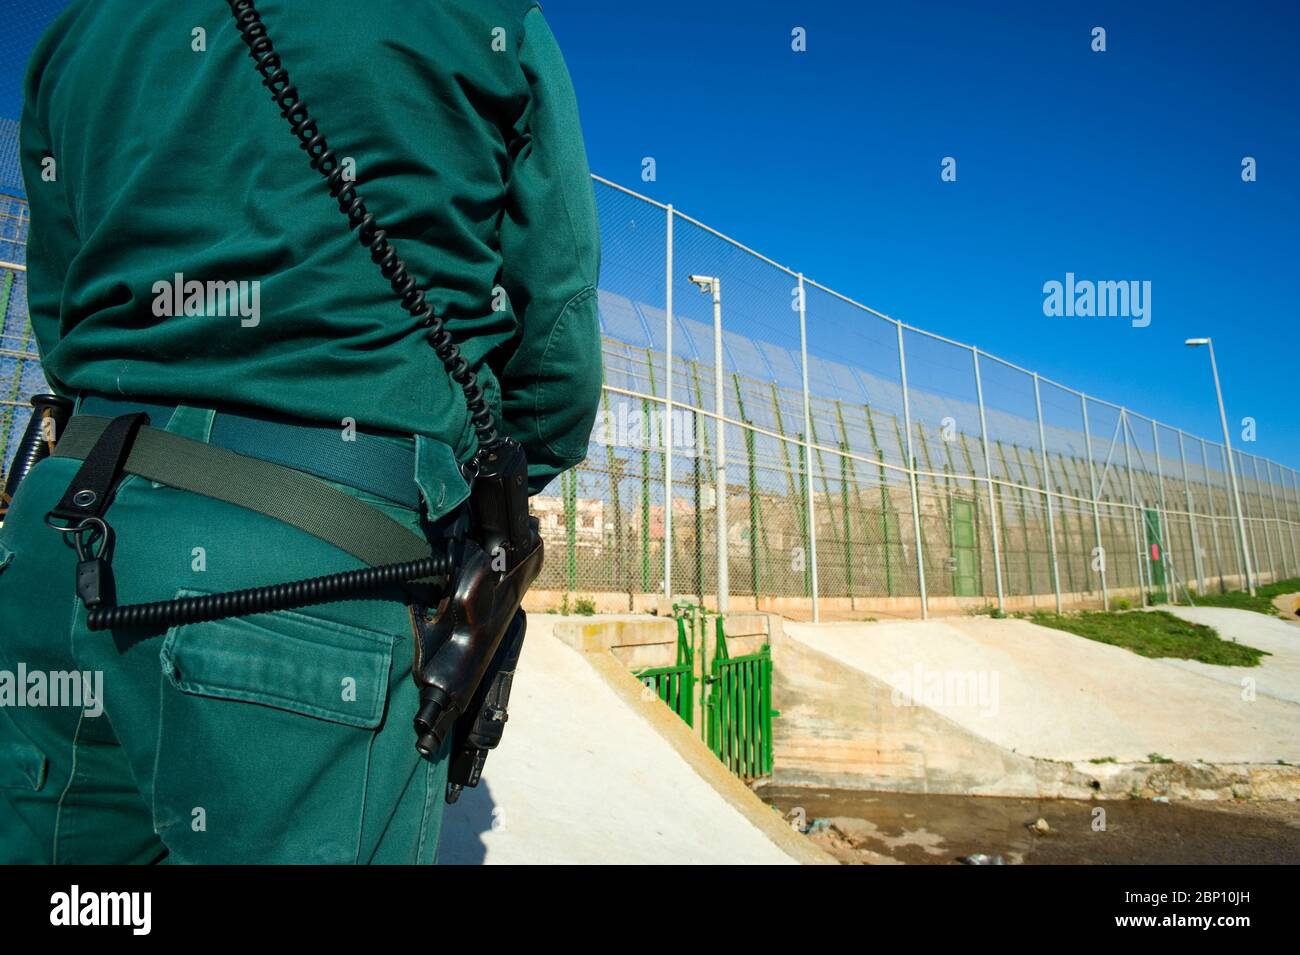 MELILLA,SPAIN-APRIL 19 : A Guardia Civil stands near the perimeter fence that separates the Spanish enclave of Melilla and Morocco on April 19,2010 in Melilla, Spain. The fence which marks the border around the Spanish enclave in northern Morocco was build to discourage illegal immigrants from attempting to enter to Melilla. ( Photo by Jordi Cami) Stock Photo